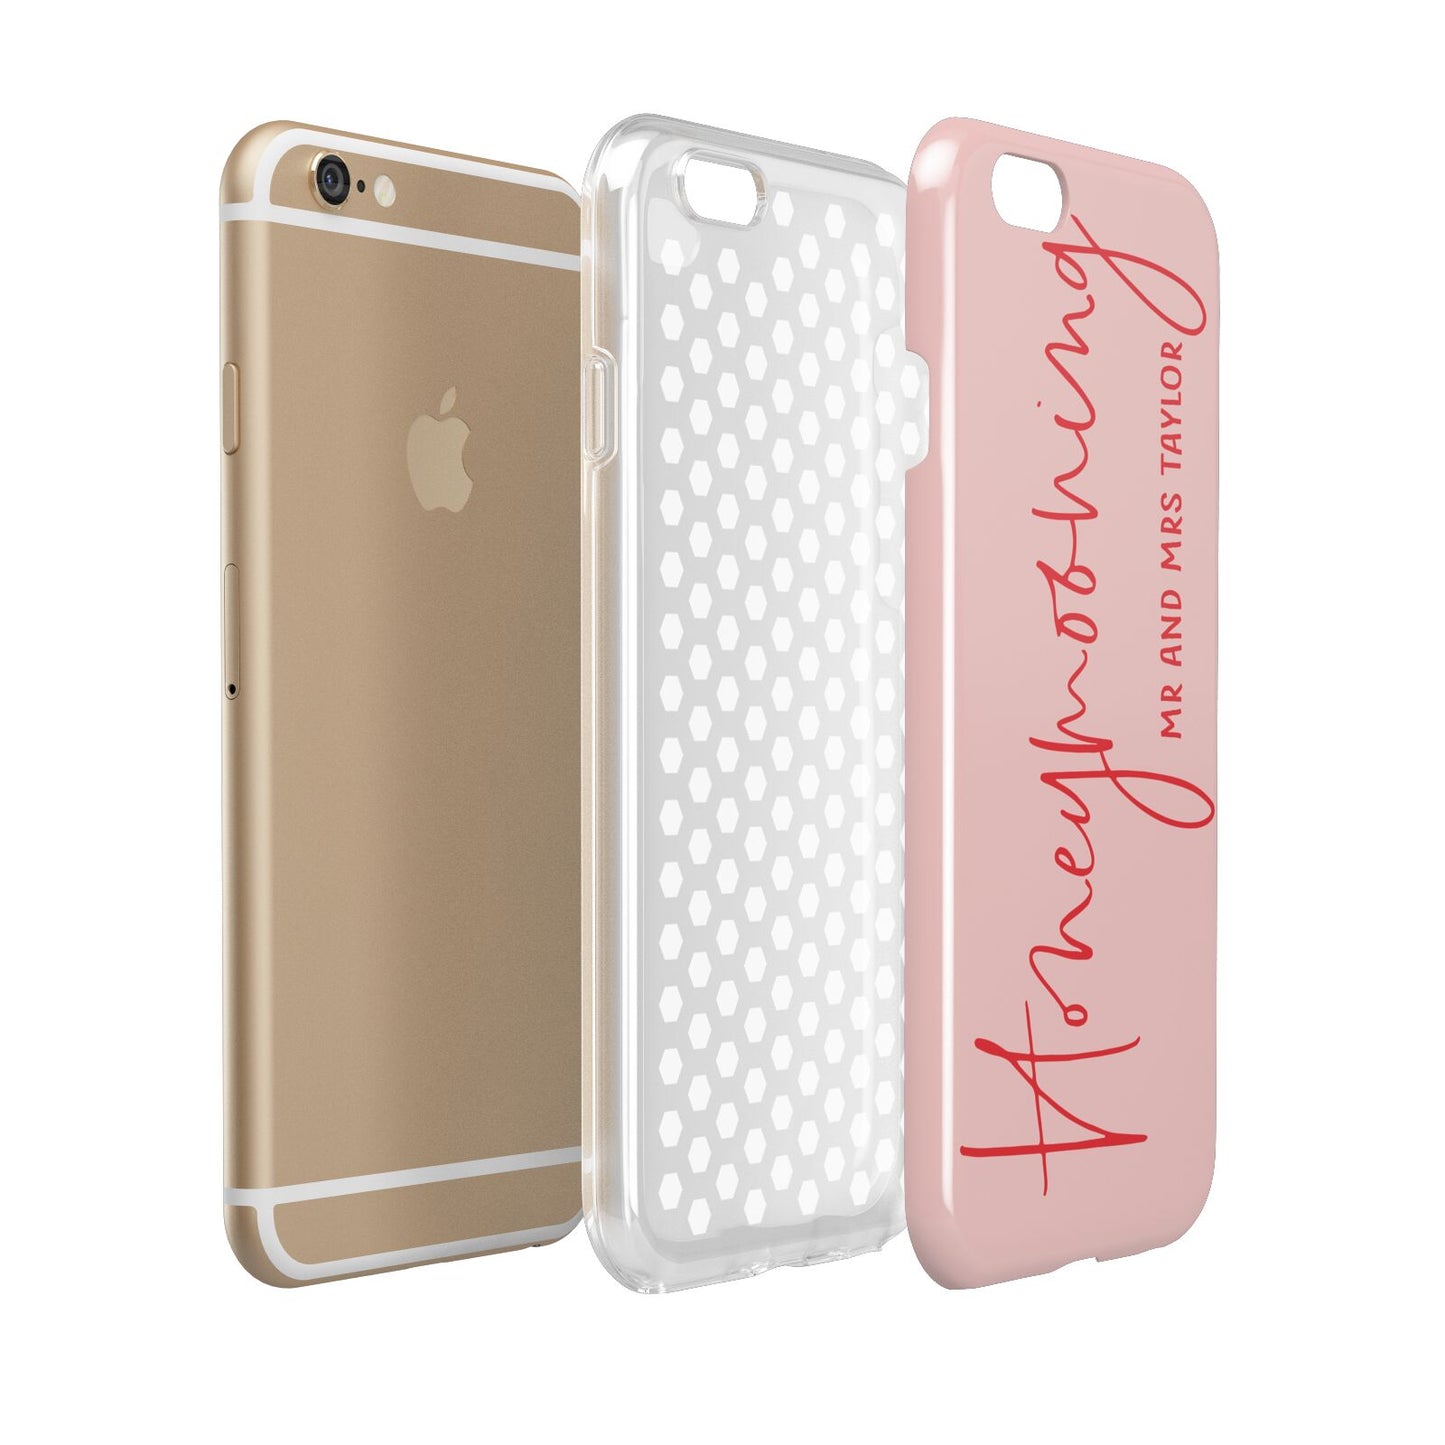 Honeymooning Apple iPhone 6 3D Tough Case Expanded view